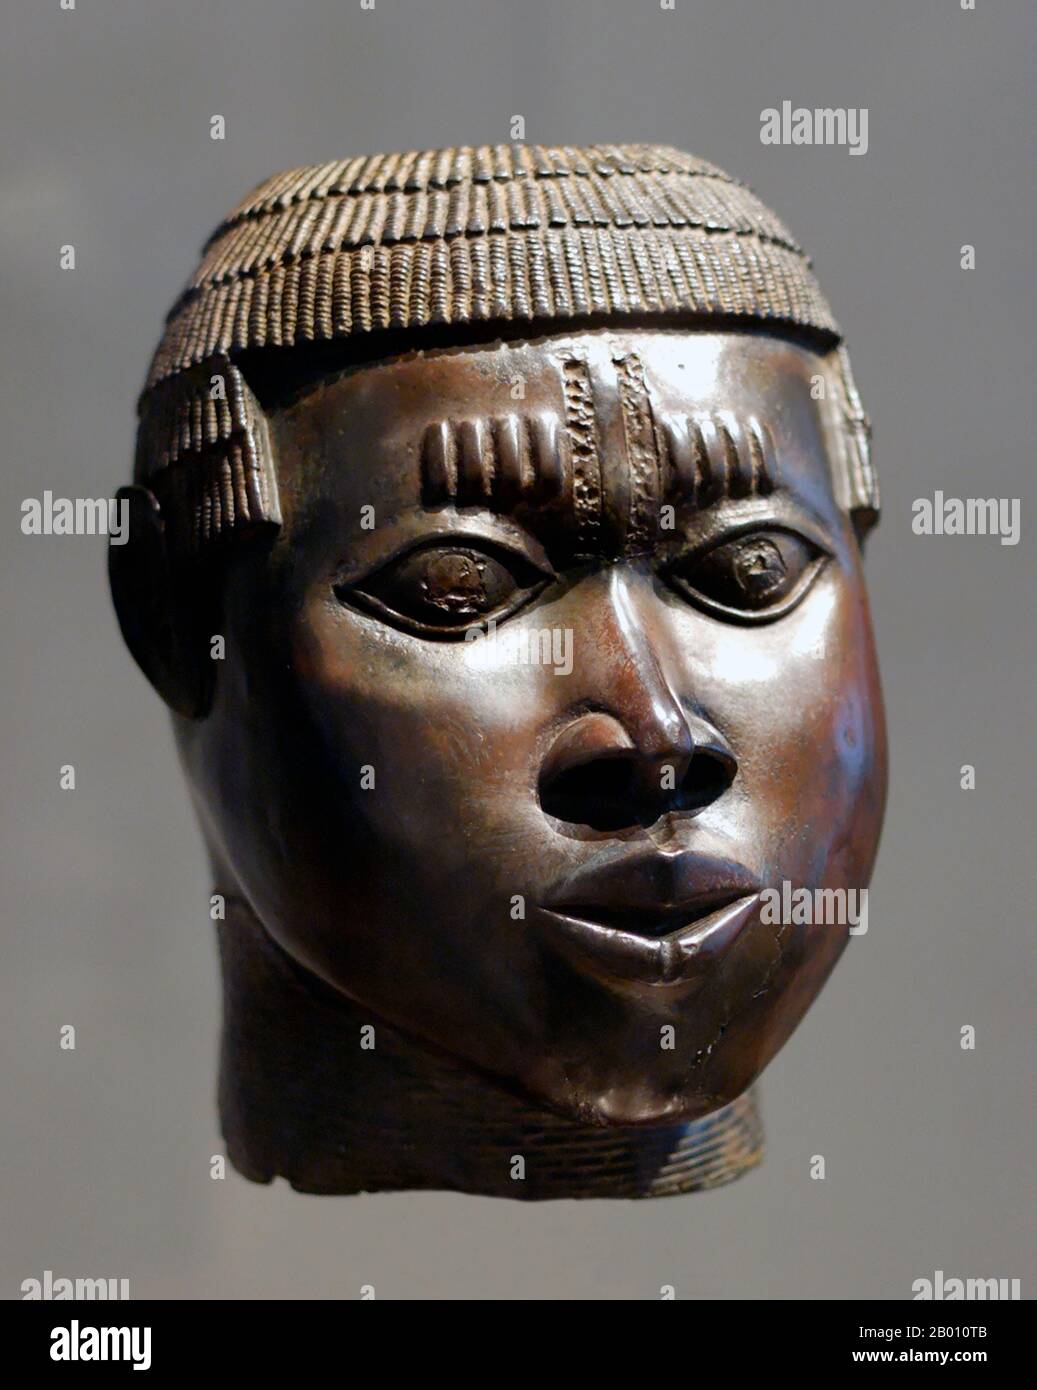 Nigeria: Sculpture of the Benin Kingdom. Lost-wax cast bronze, Nigeria, late 15th-middle 16th century.  The Benin Empire (1440–1897) was a pre-colonial African state in what is now modern Nigeria. It is not to be confused with the modern-day country called Benin (and formerly called Dahomey). Stock Photo